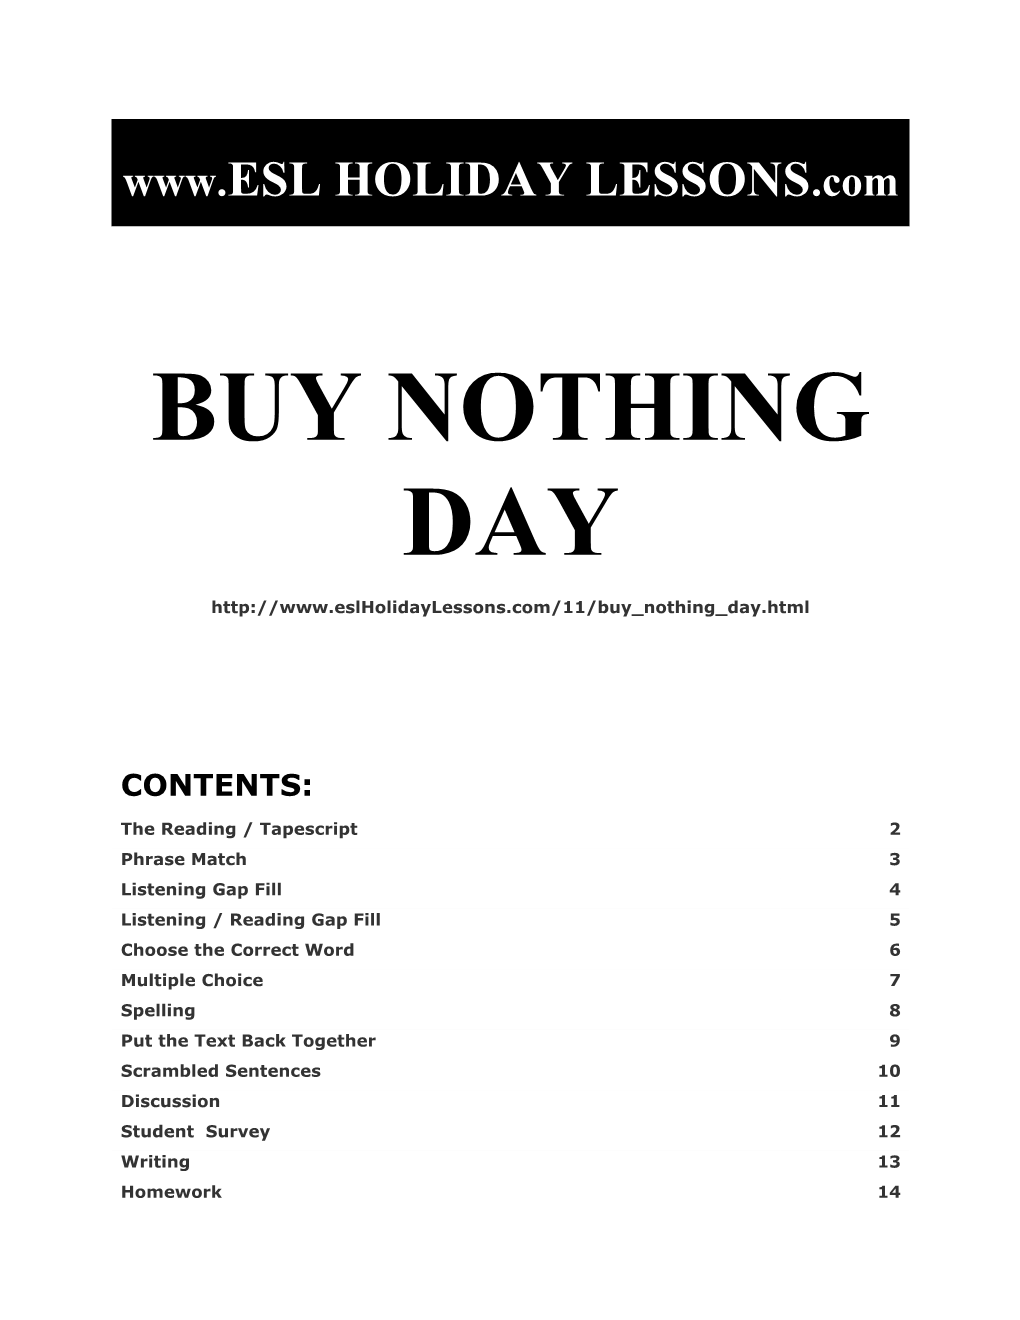 Holiday Lessons - Buy Nothing Day